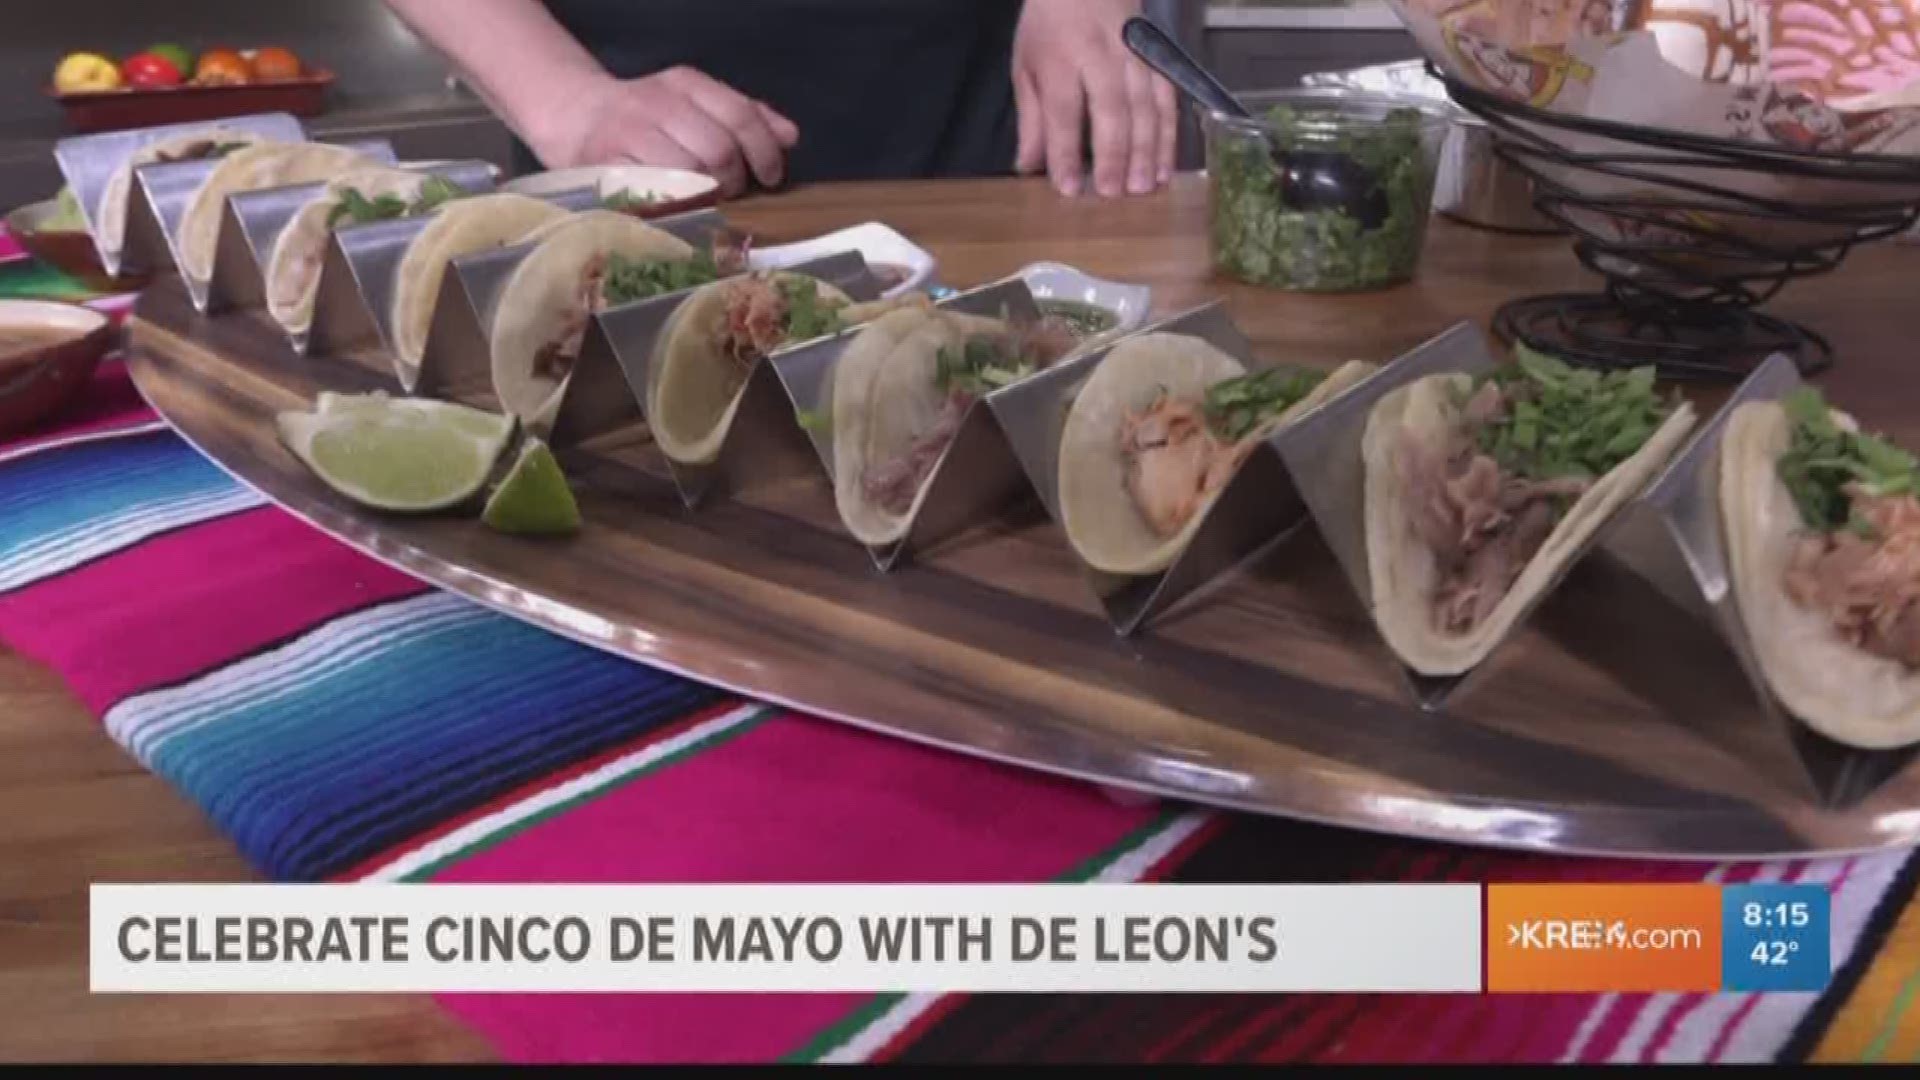 Sergio from DeLeon's Taco & Bar met with KREM's Brittany Bailey and Jen York to talk about their newest location, and their preparations for Cinco de Mayo.